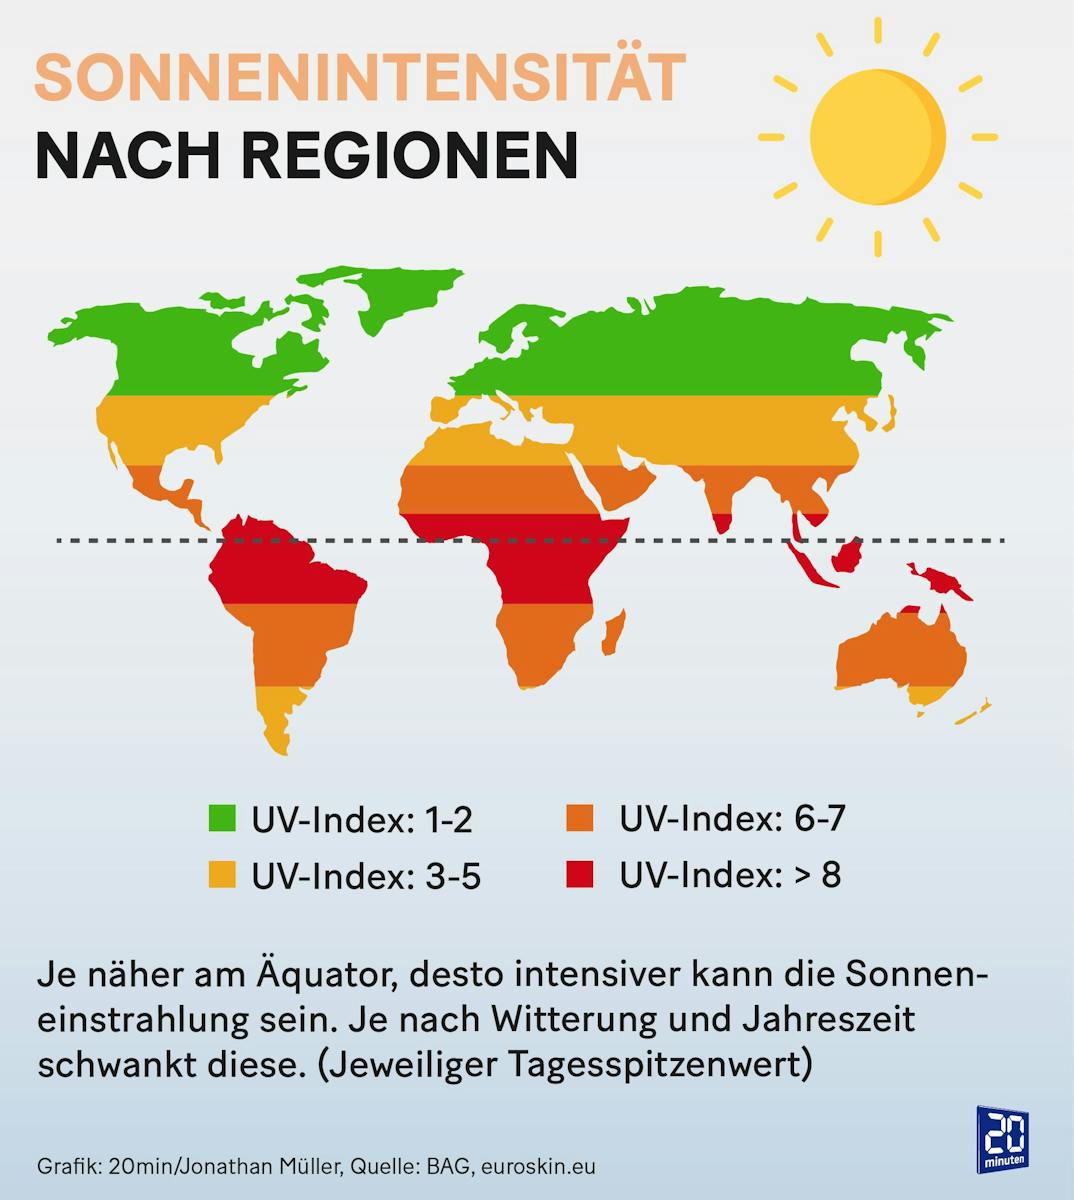 The following applies: Closer to the equator, solar radiation is more intense.  But: The UV index refers to the UV value at the ground and increases with altitude.  In the mountains it is many times more and you need special protection.